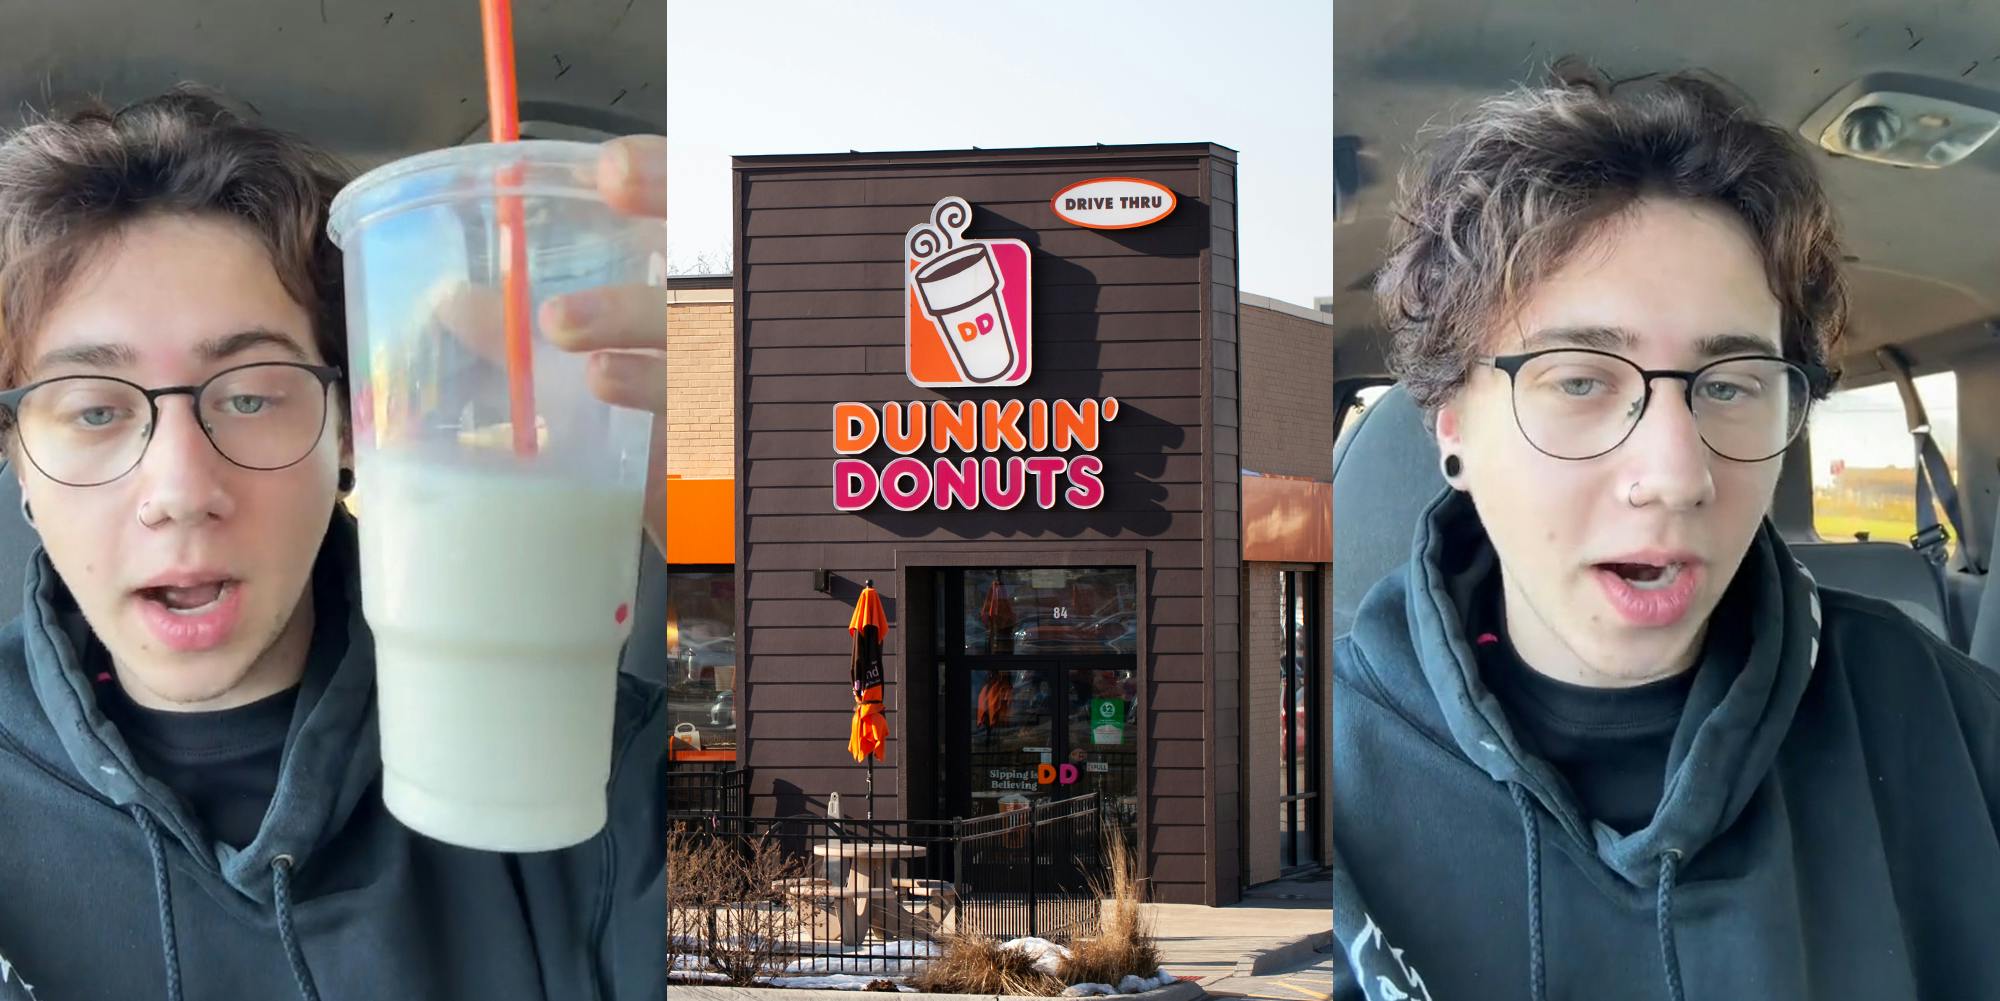 Person speaking in car holding up Dunkin' iced chai latte (l) Dunkin' Donuts sign on building (c) person speaking in car (r)